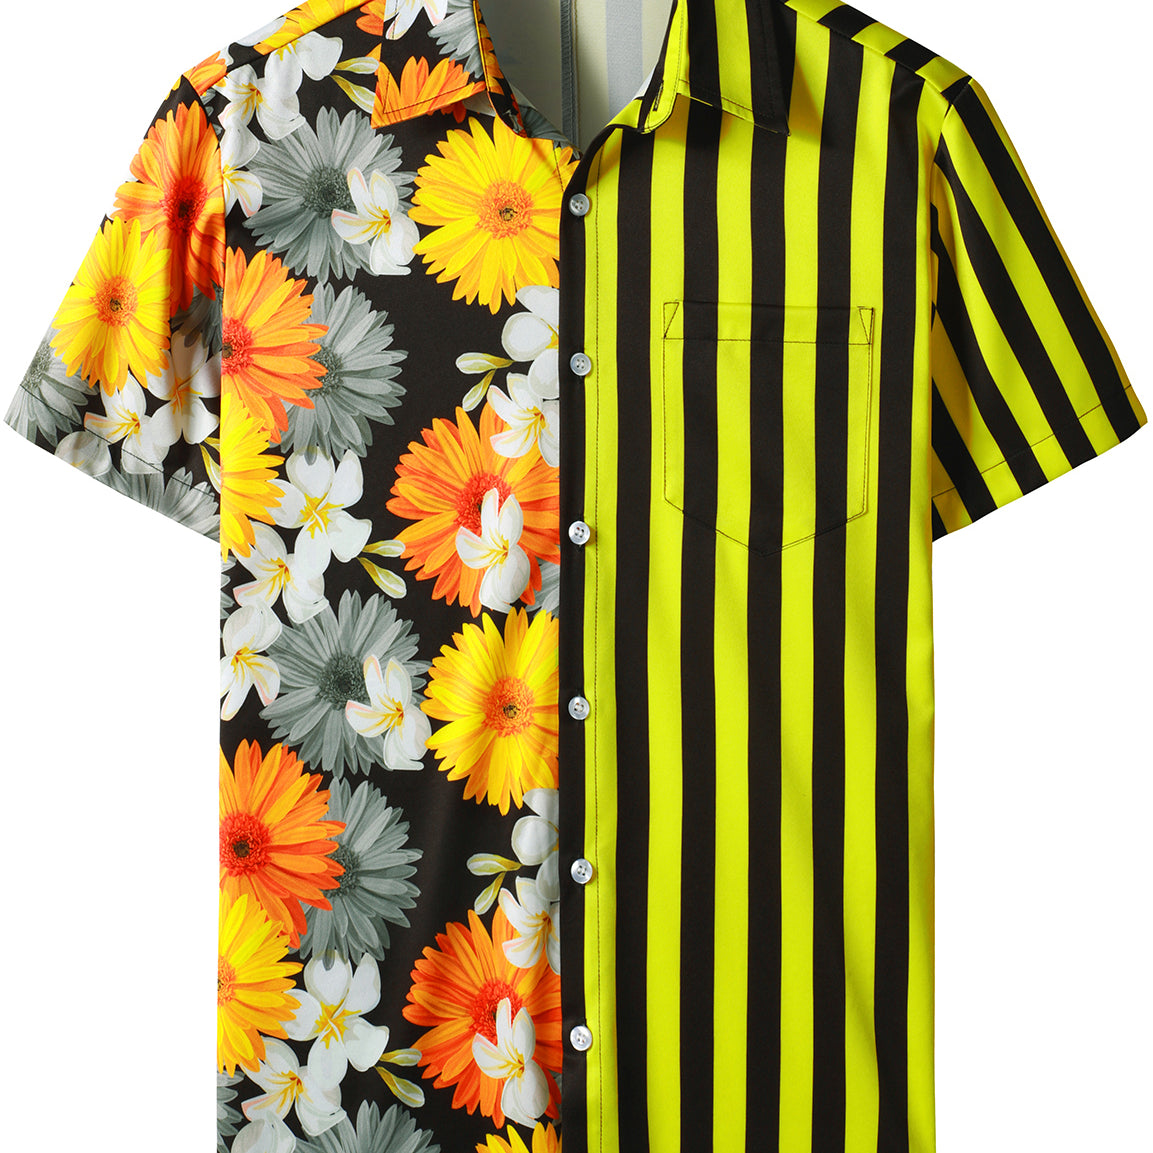 Men's Daisy Flowers Yellow Striped Print Floral Pocket Vacation Casual Short Sleeve Summer Shirt